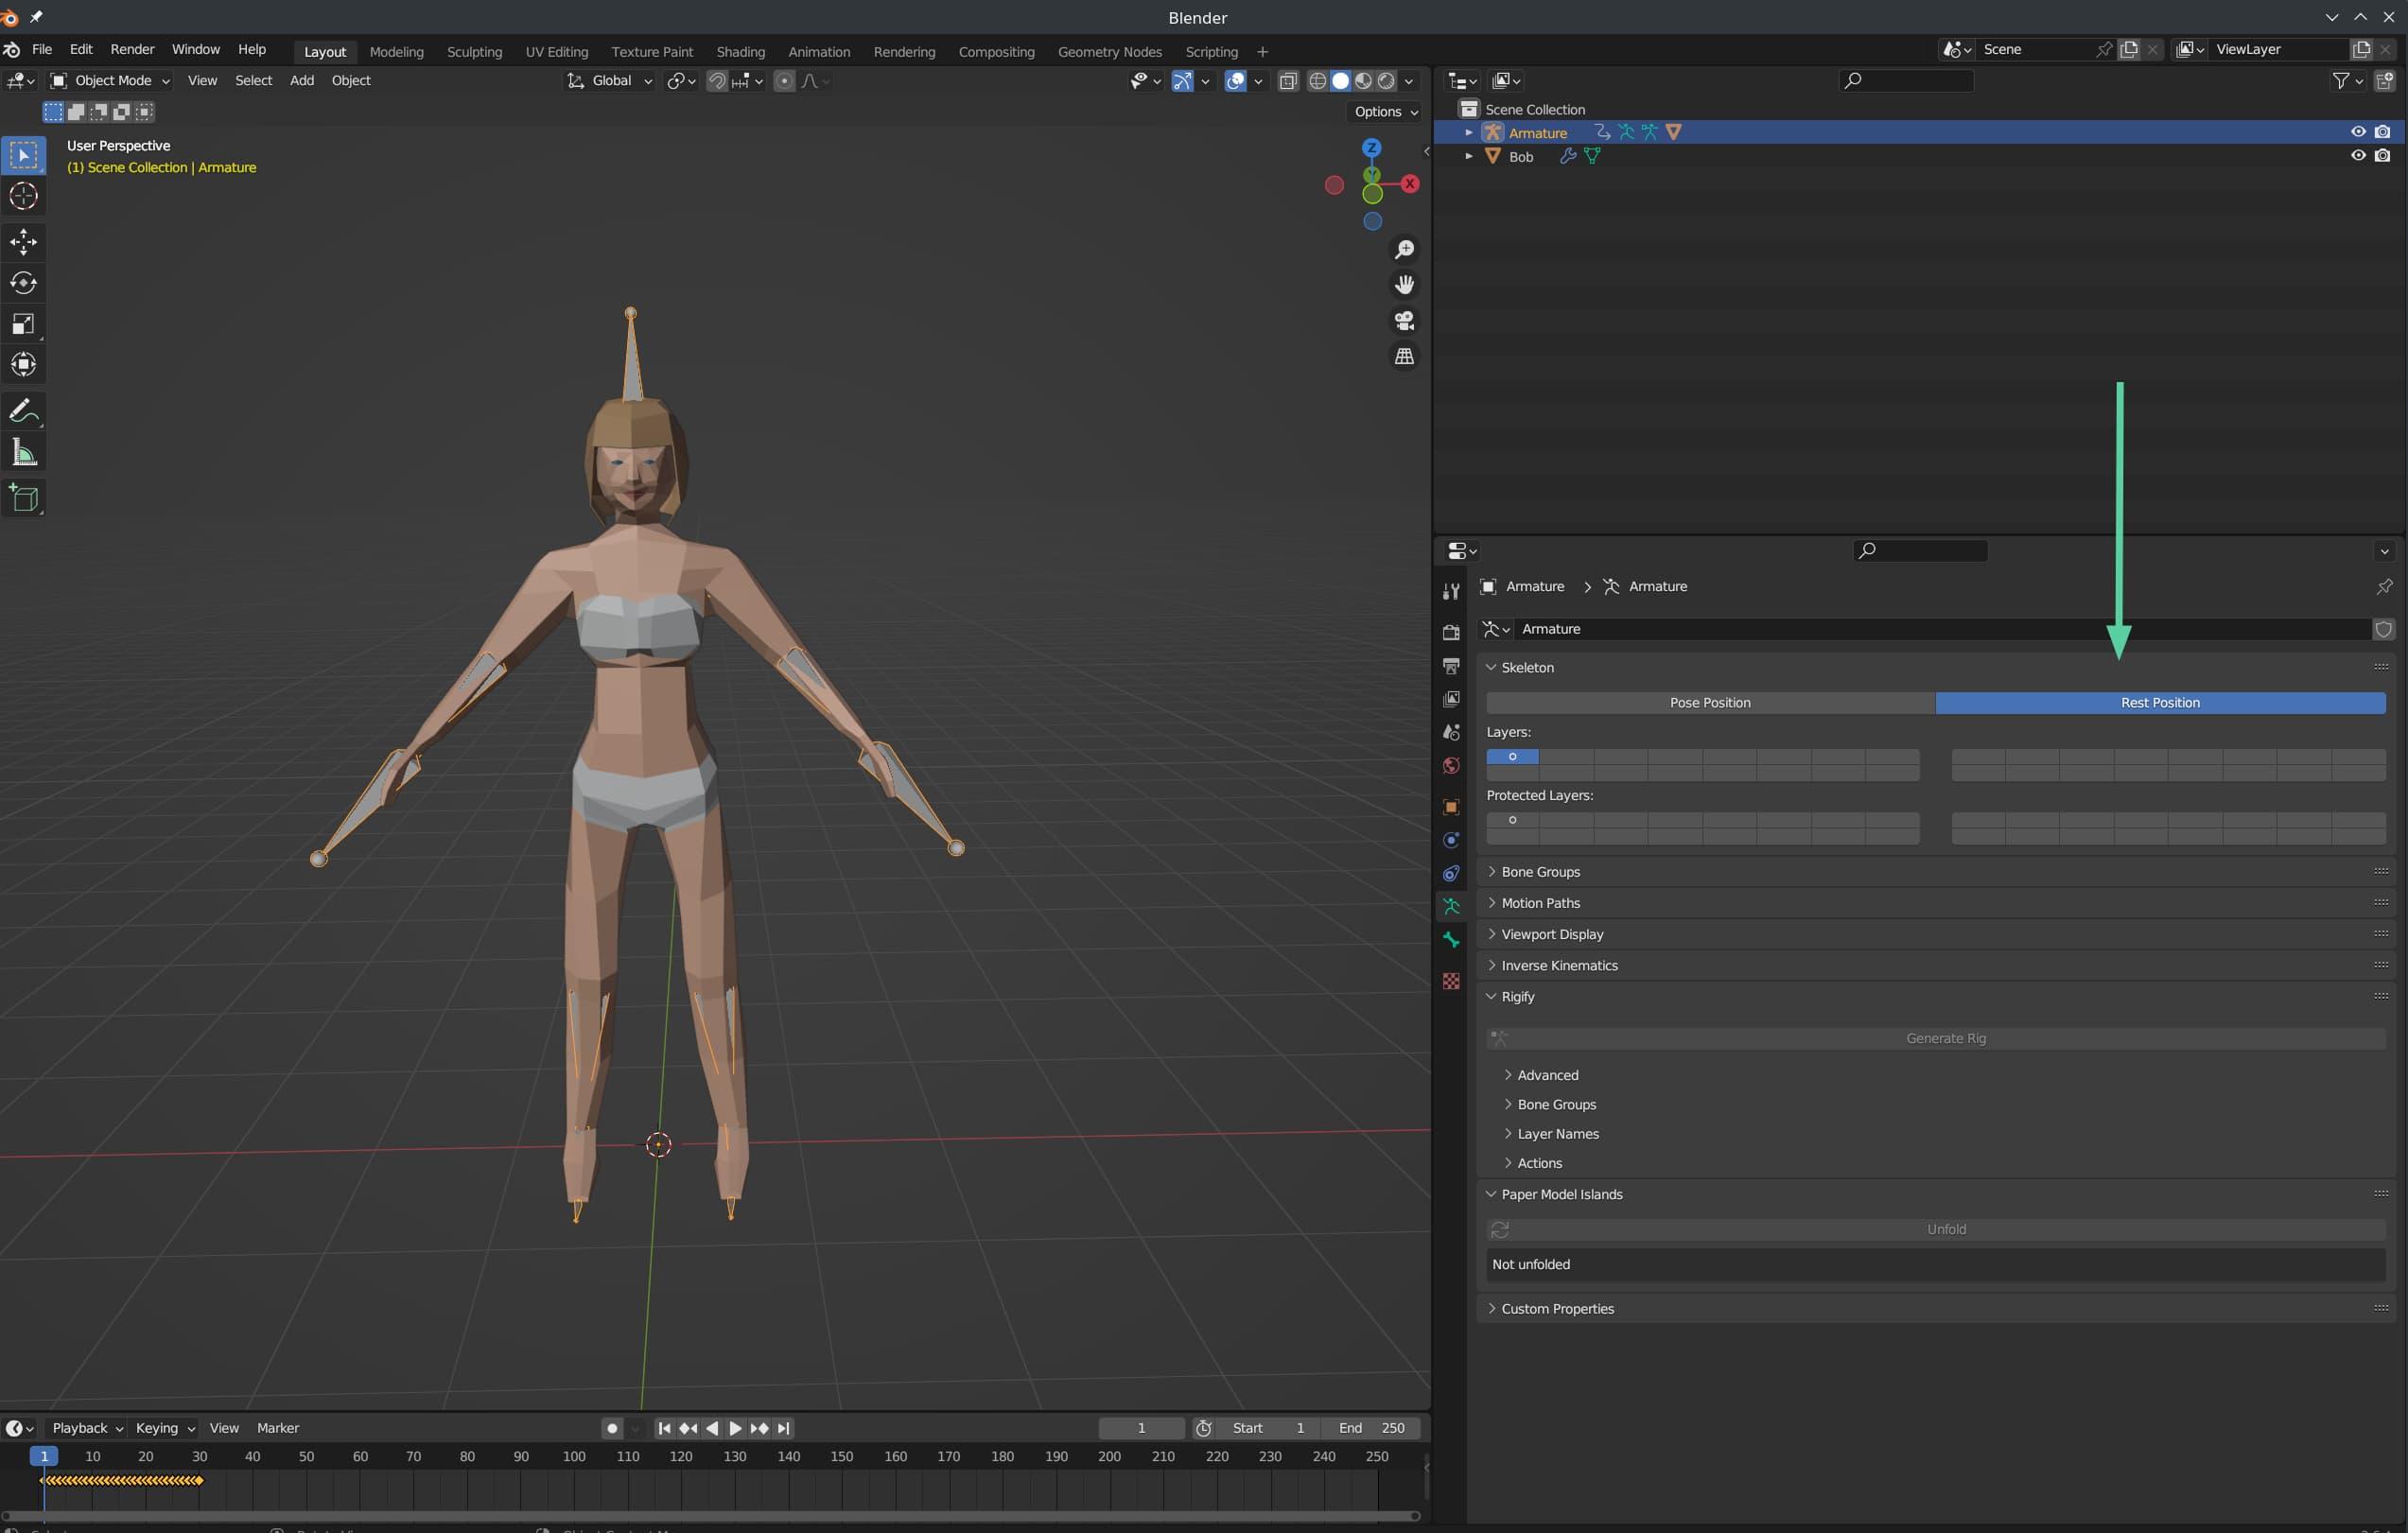 Blender screenshot, showing the location of the "Rest Position" button. The character on the left has returned to a default "A pose"